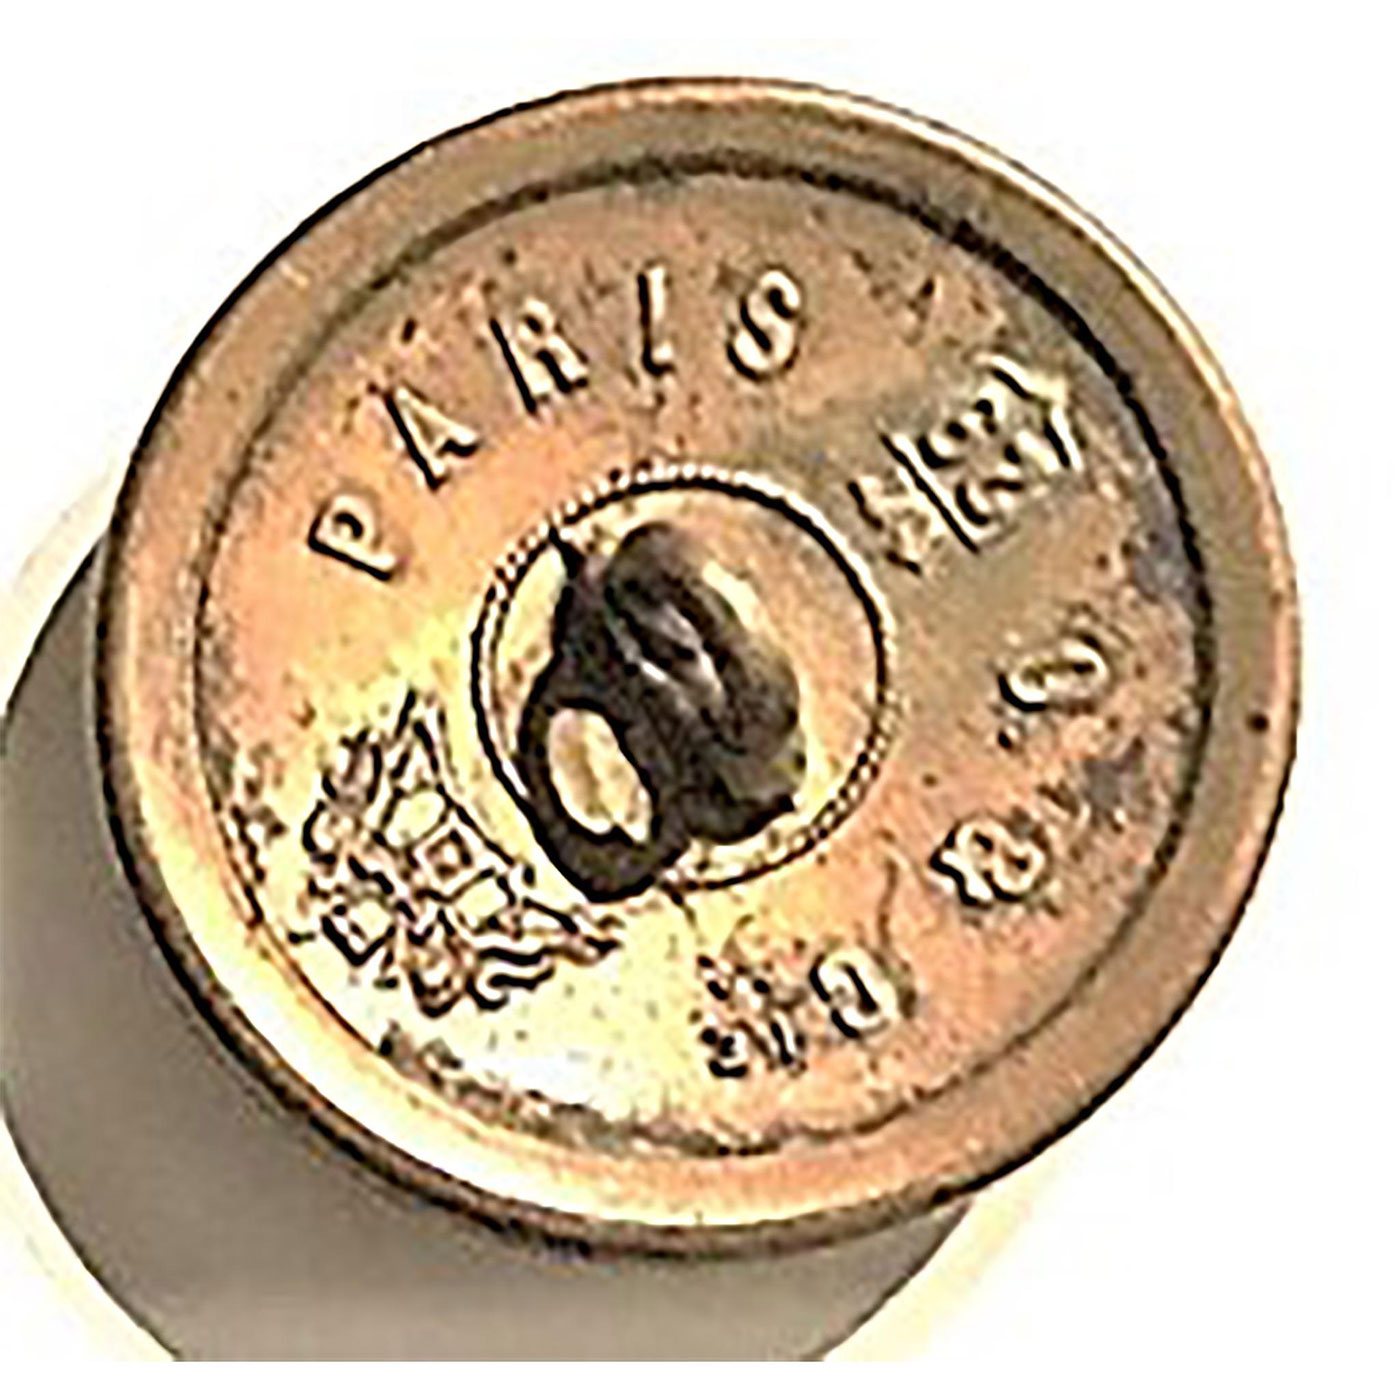 A RARE FRENCH SPORTING/HINT CLUB BUTTON - Image 2 of 2